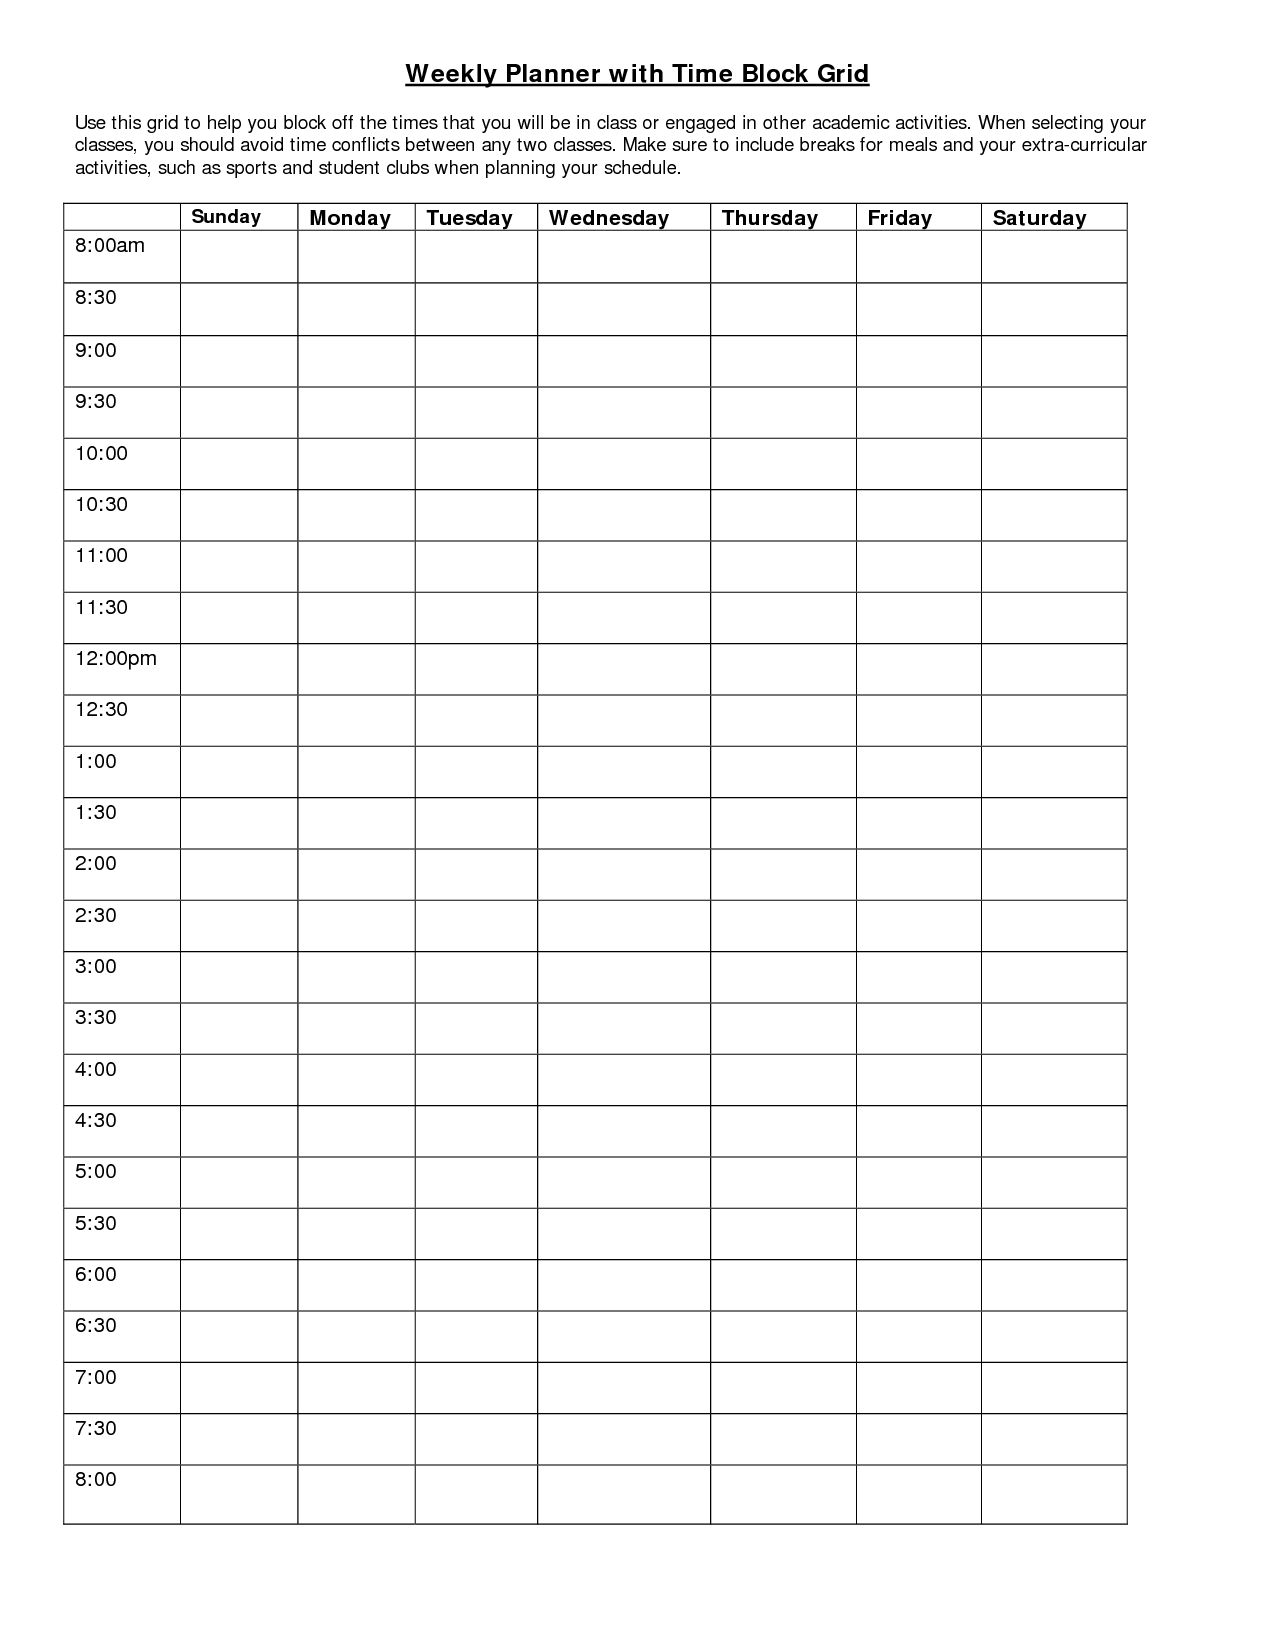 Weekly Planner With Time Block Grid | Good Ideas | Pinterest  Week Schedule Template With Times